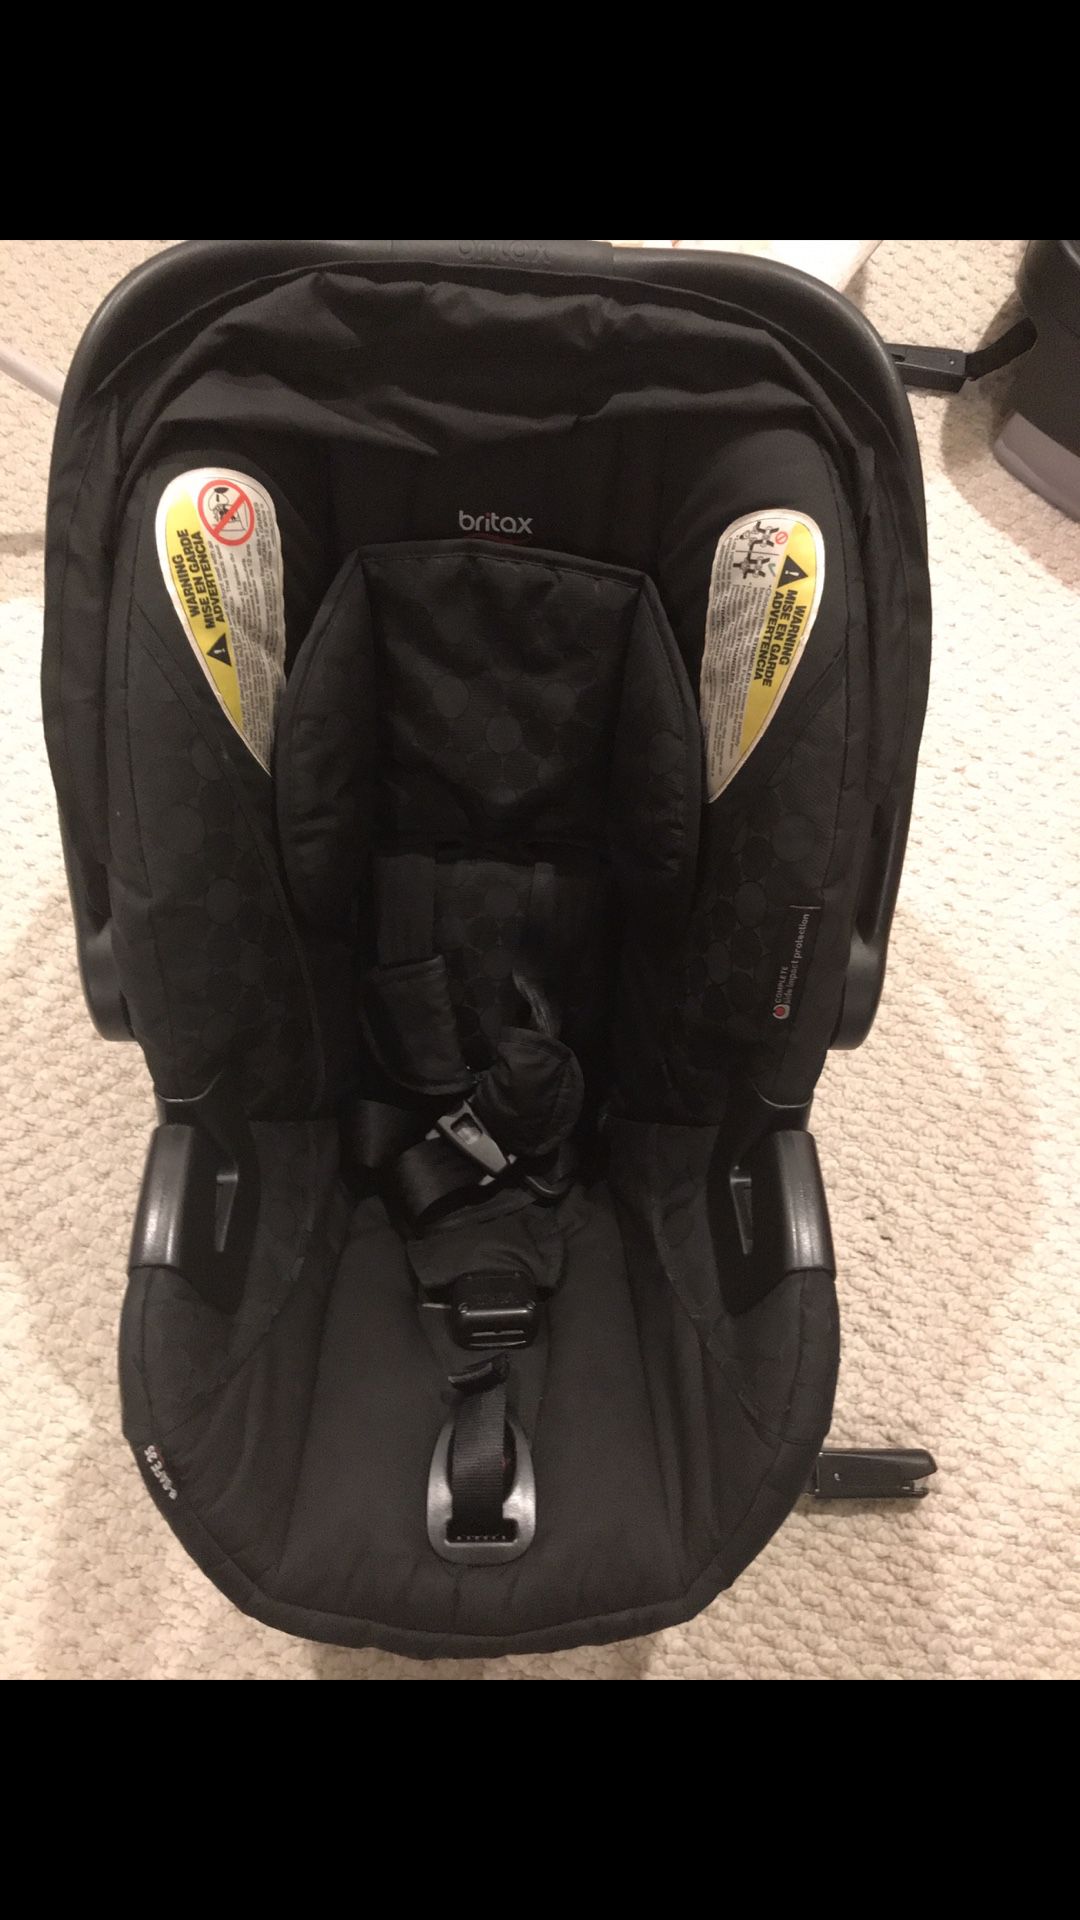 britax be safe infant seat and base